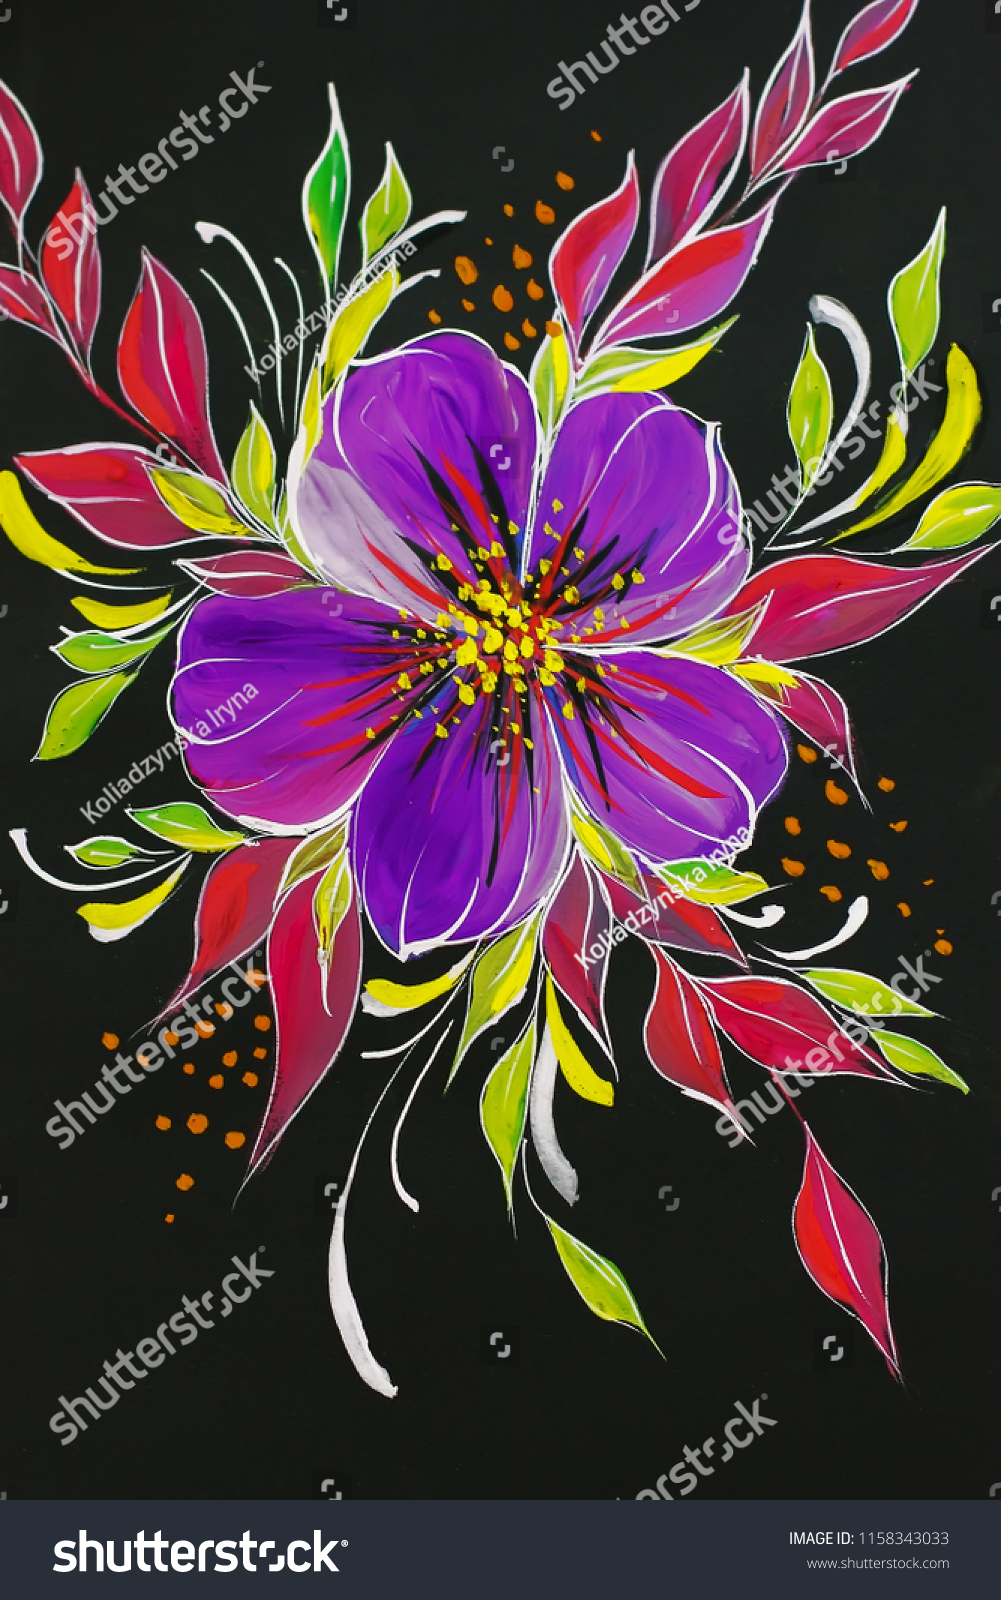 Oil Painting Flowers Black Background / Hand Painted Flowers